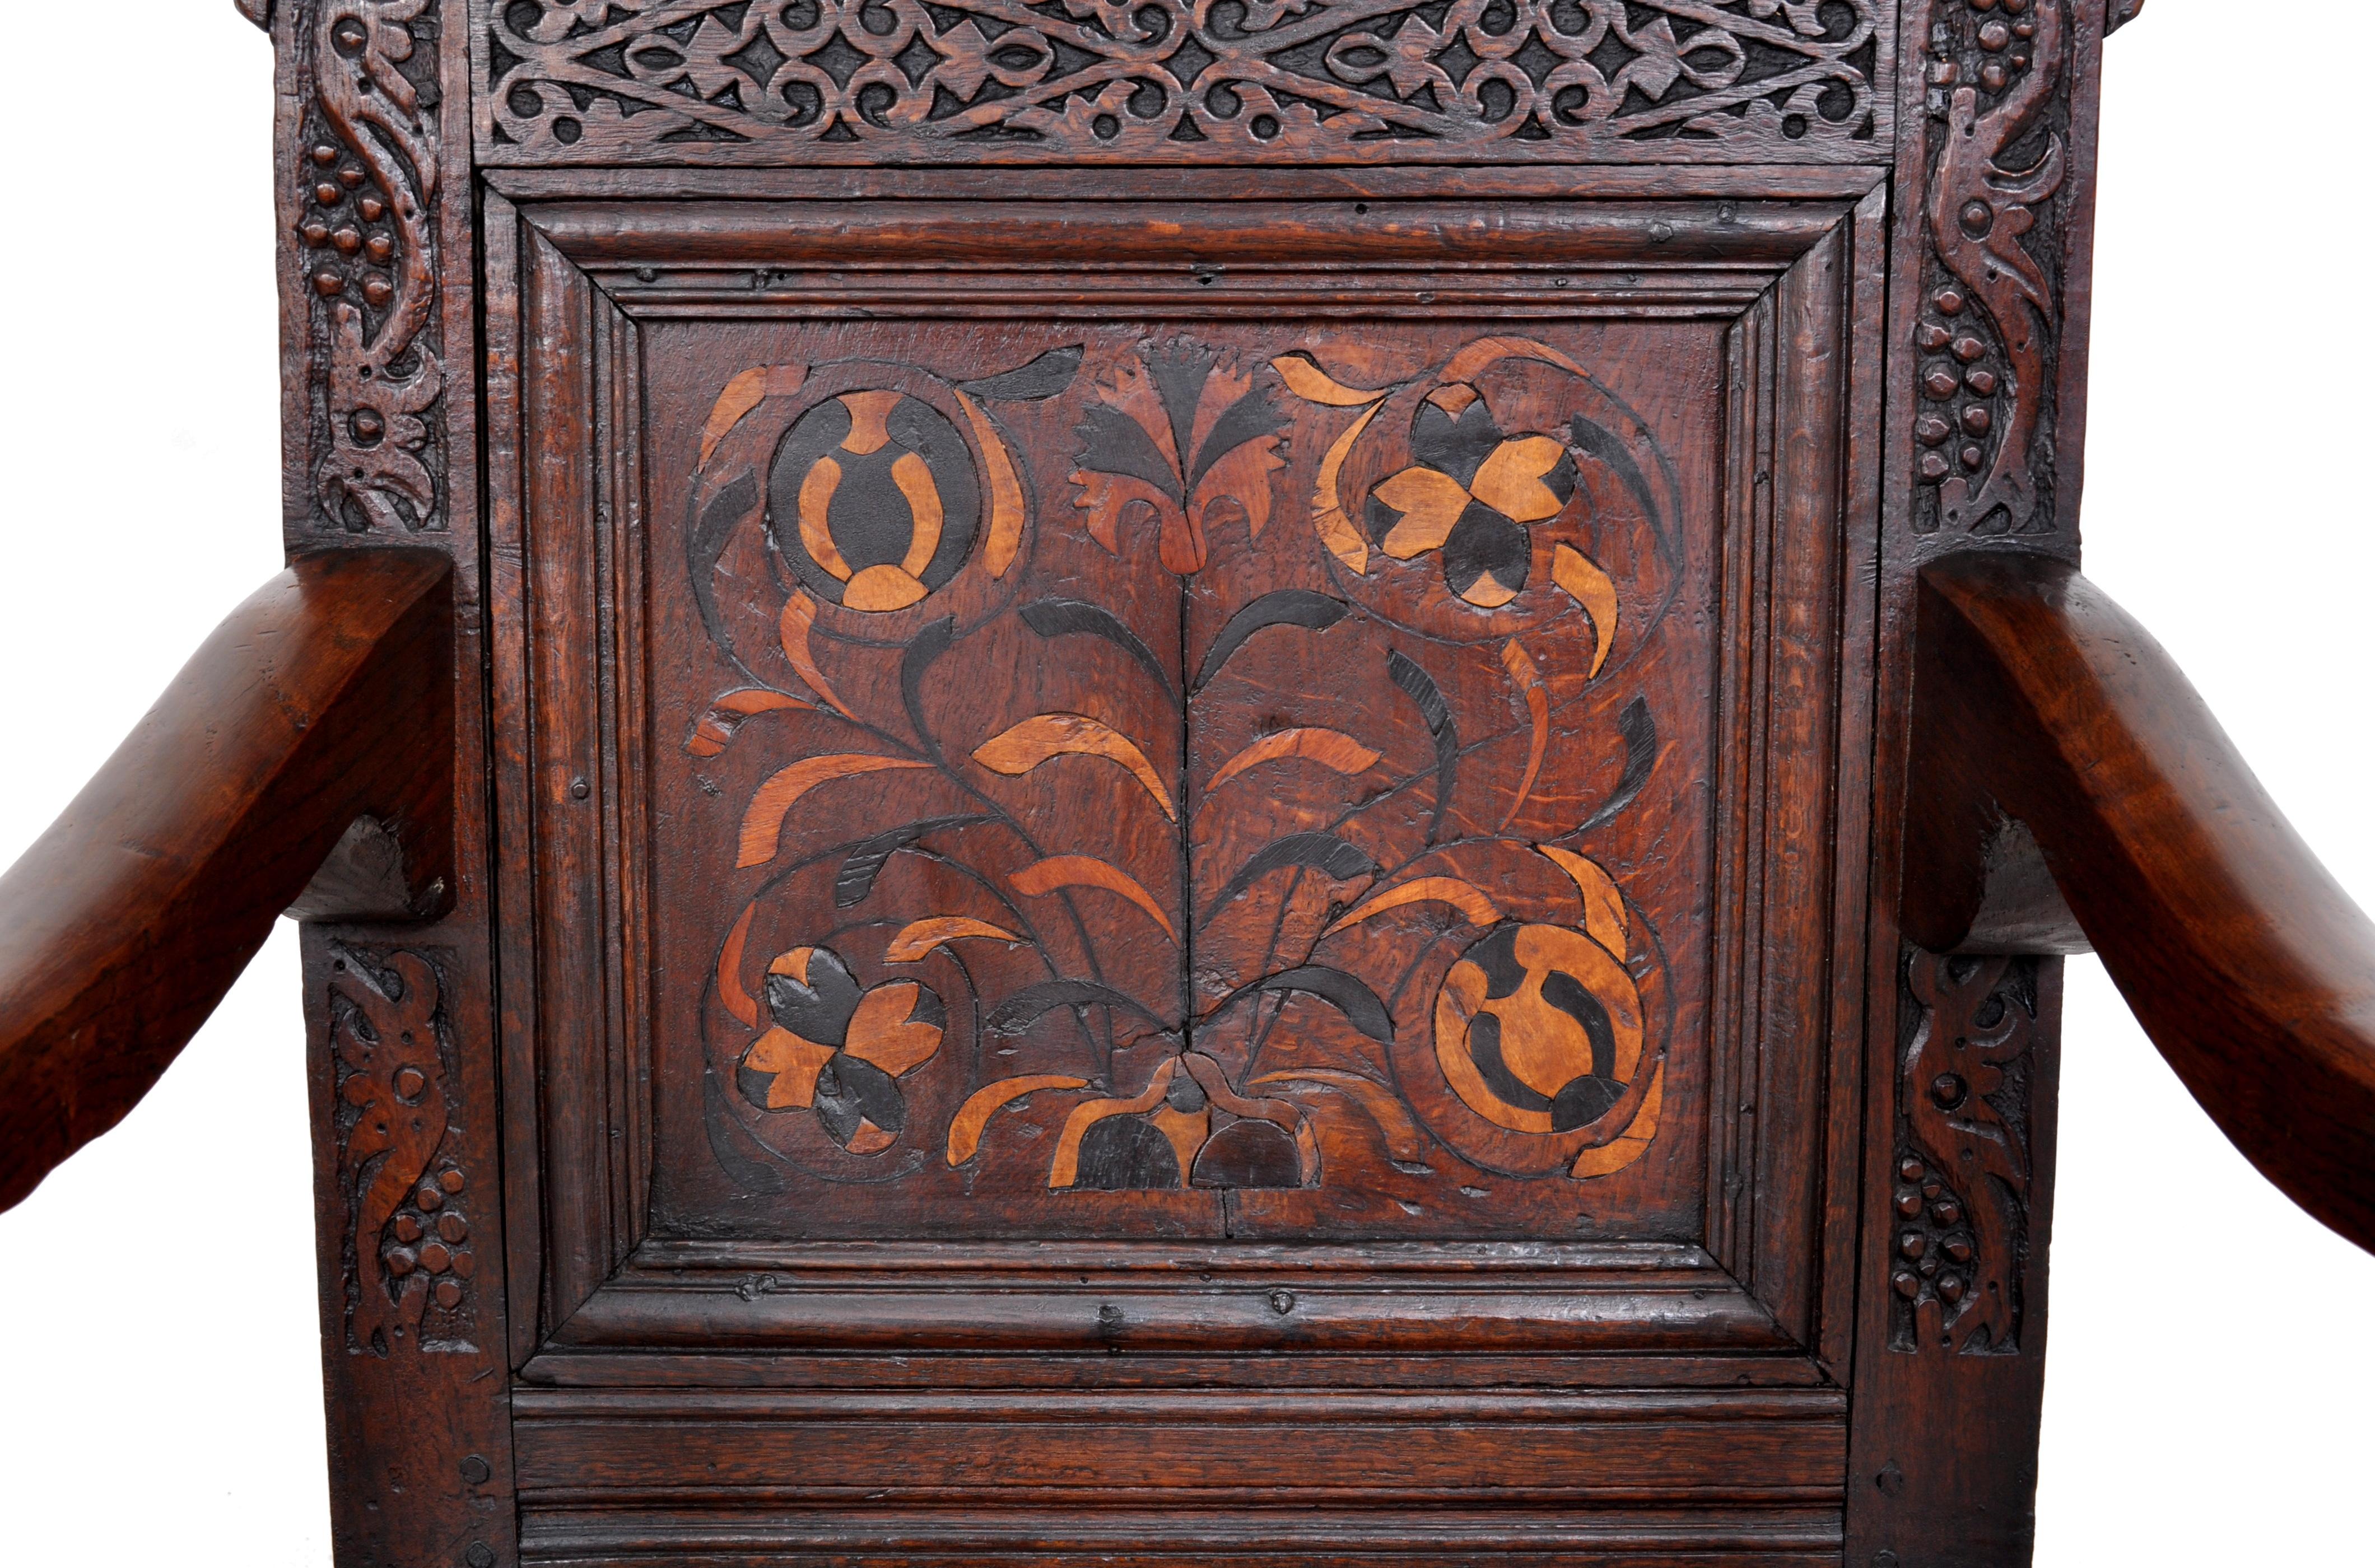 English Antique 17th Century Charles II Yorkshire Carved Inlaid Oak Wainscot Chair, 1670